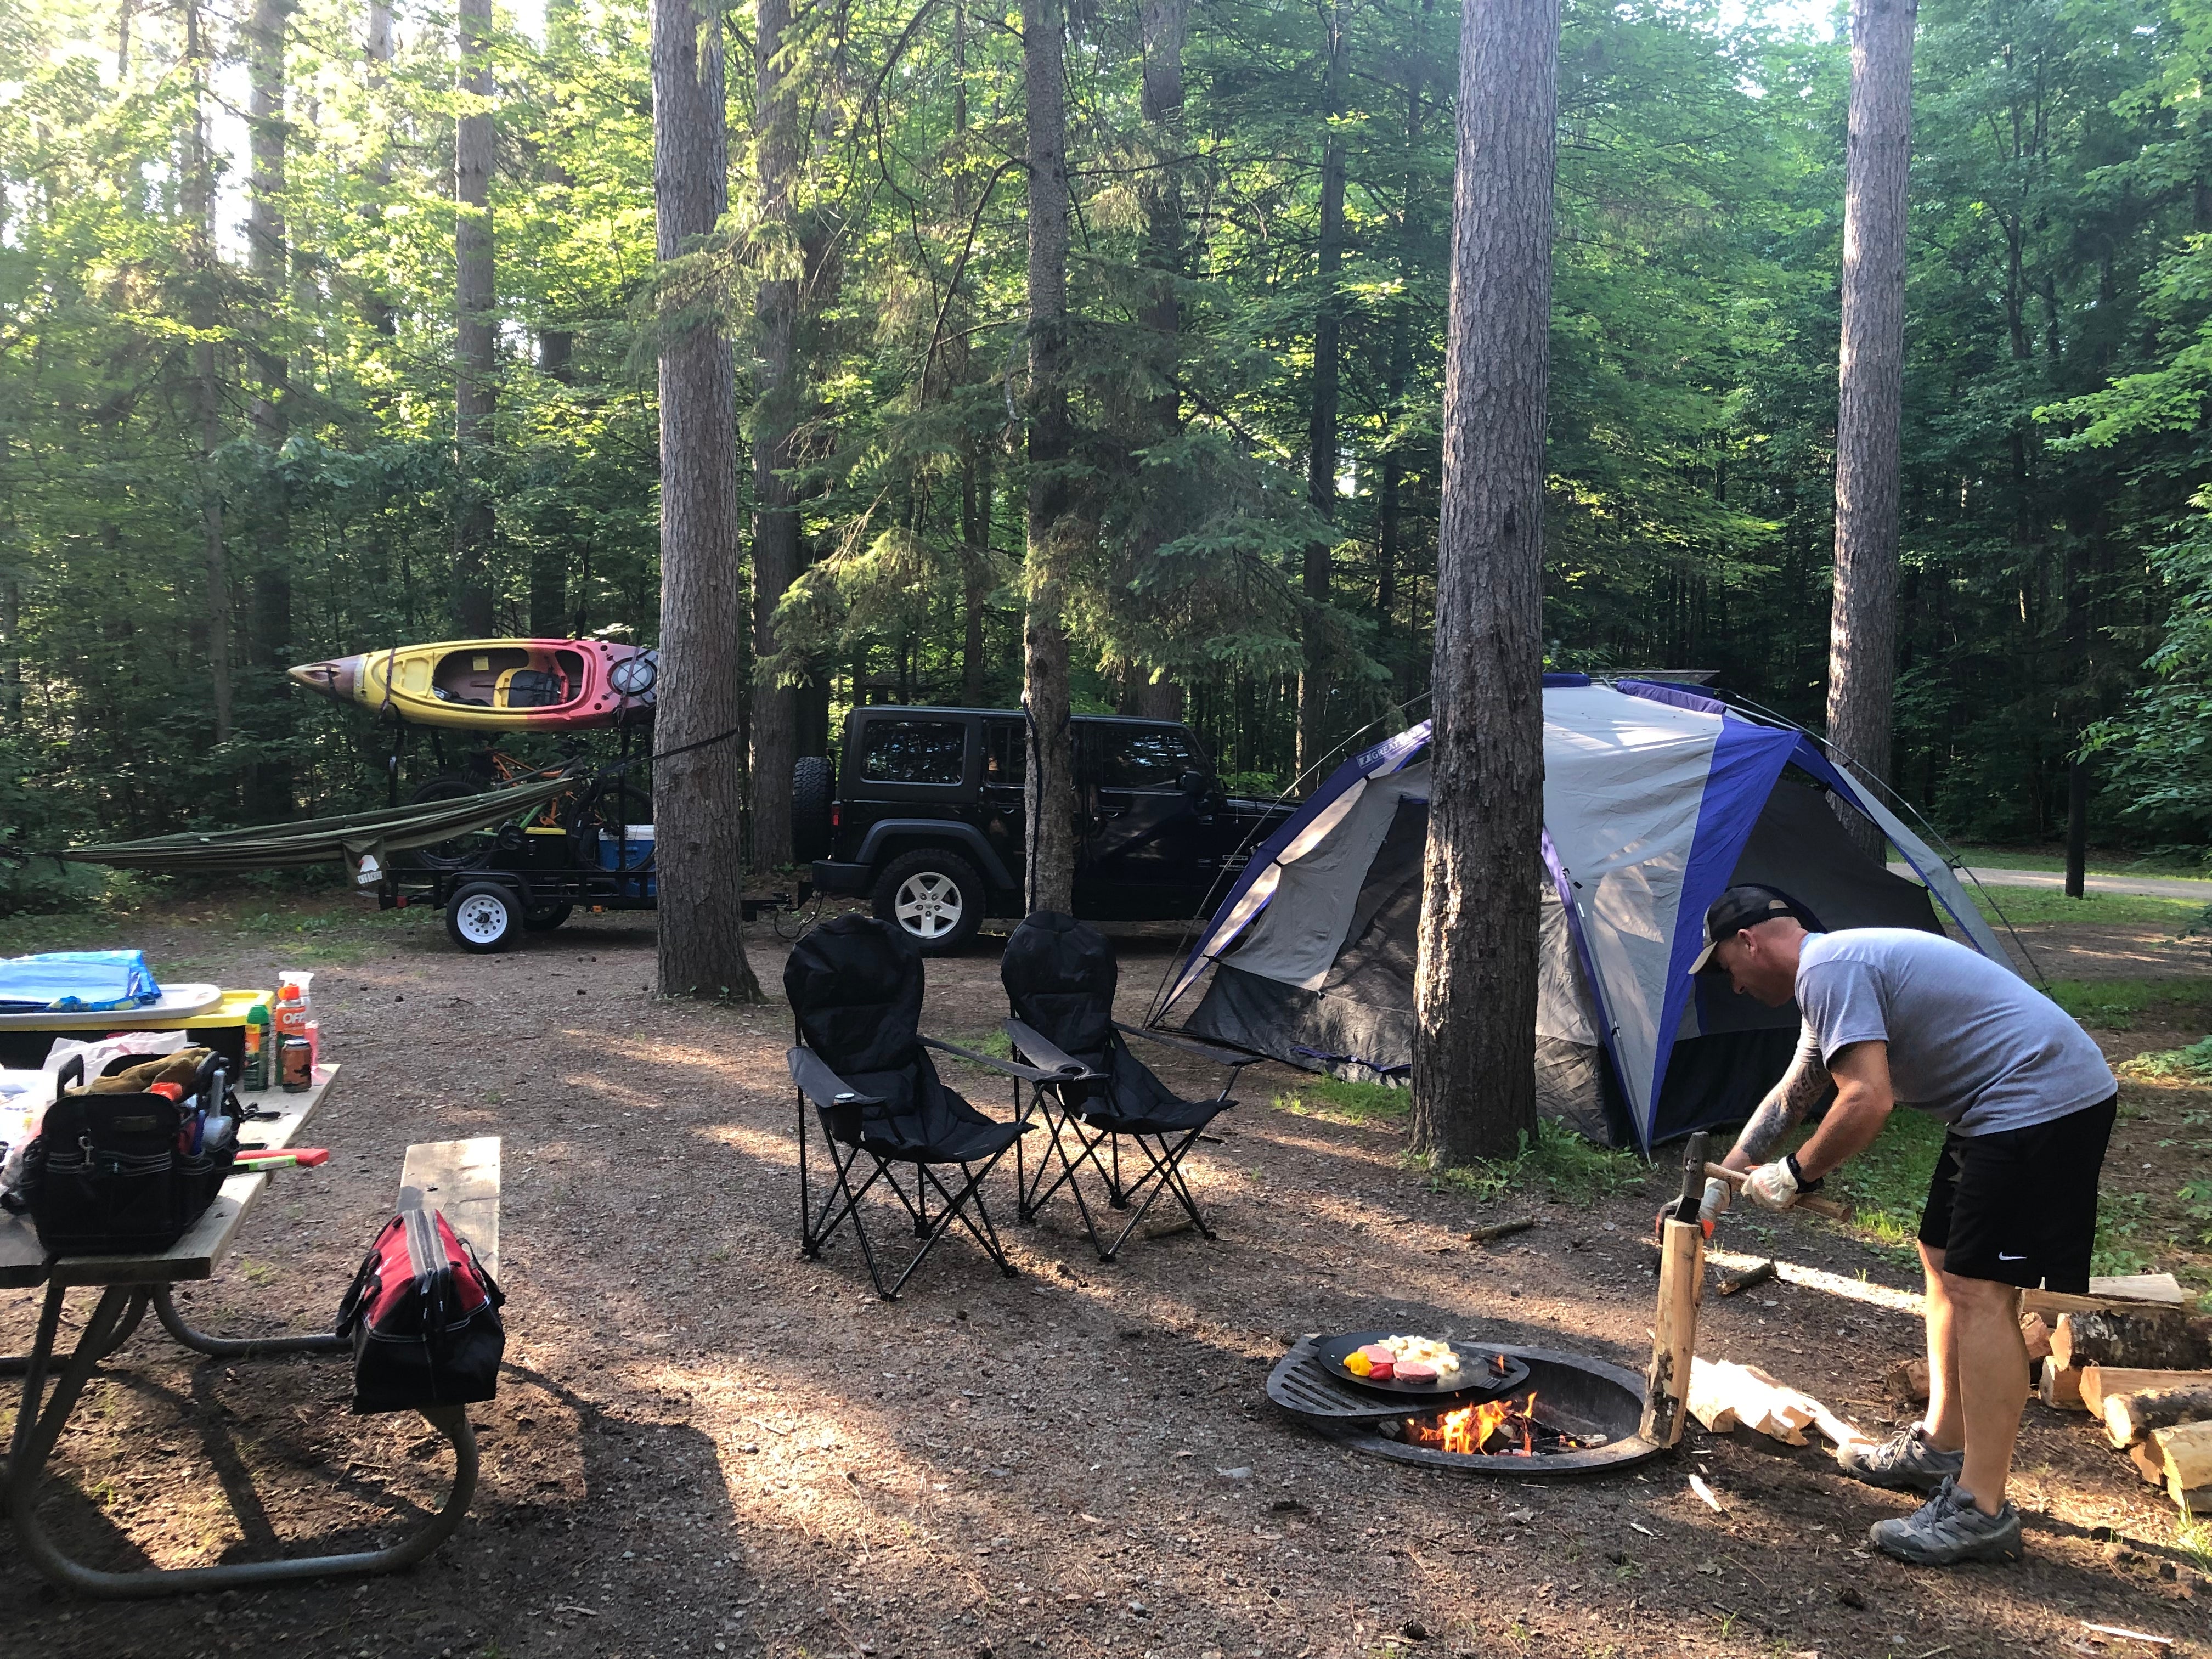 Camper submitted image from Goodman Park - 4